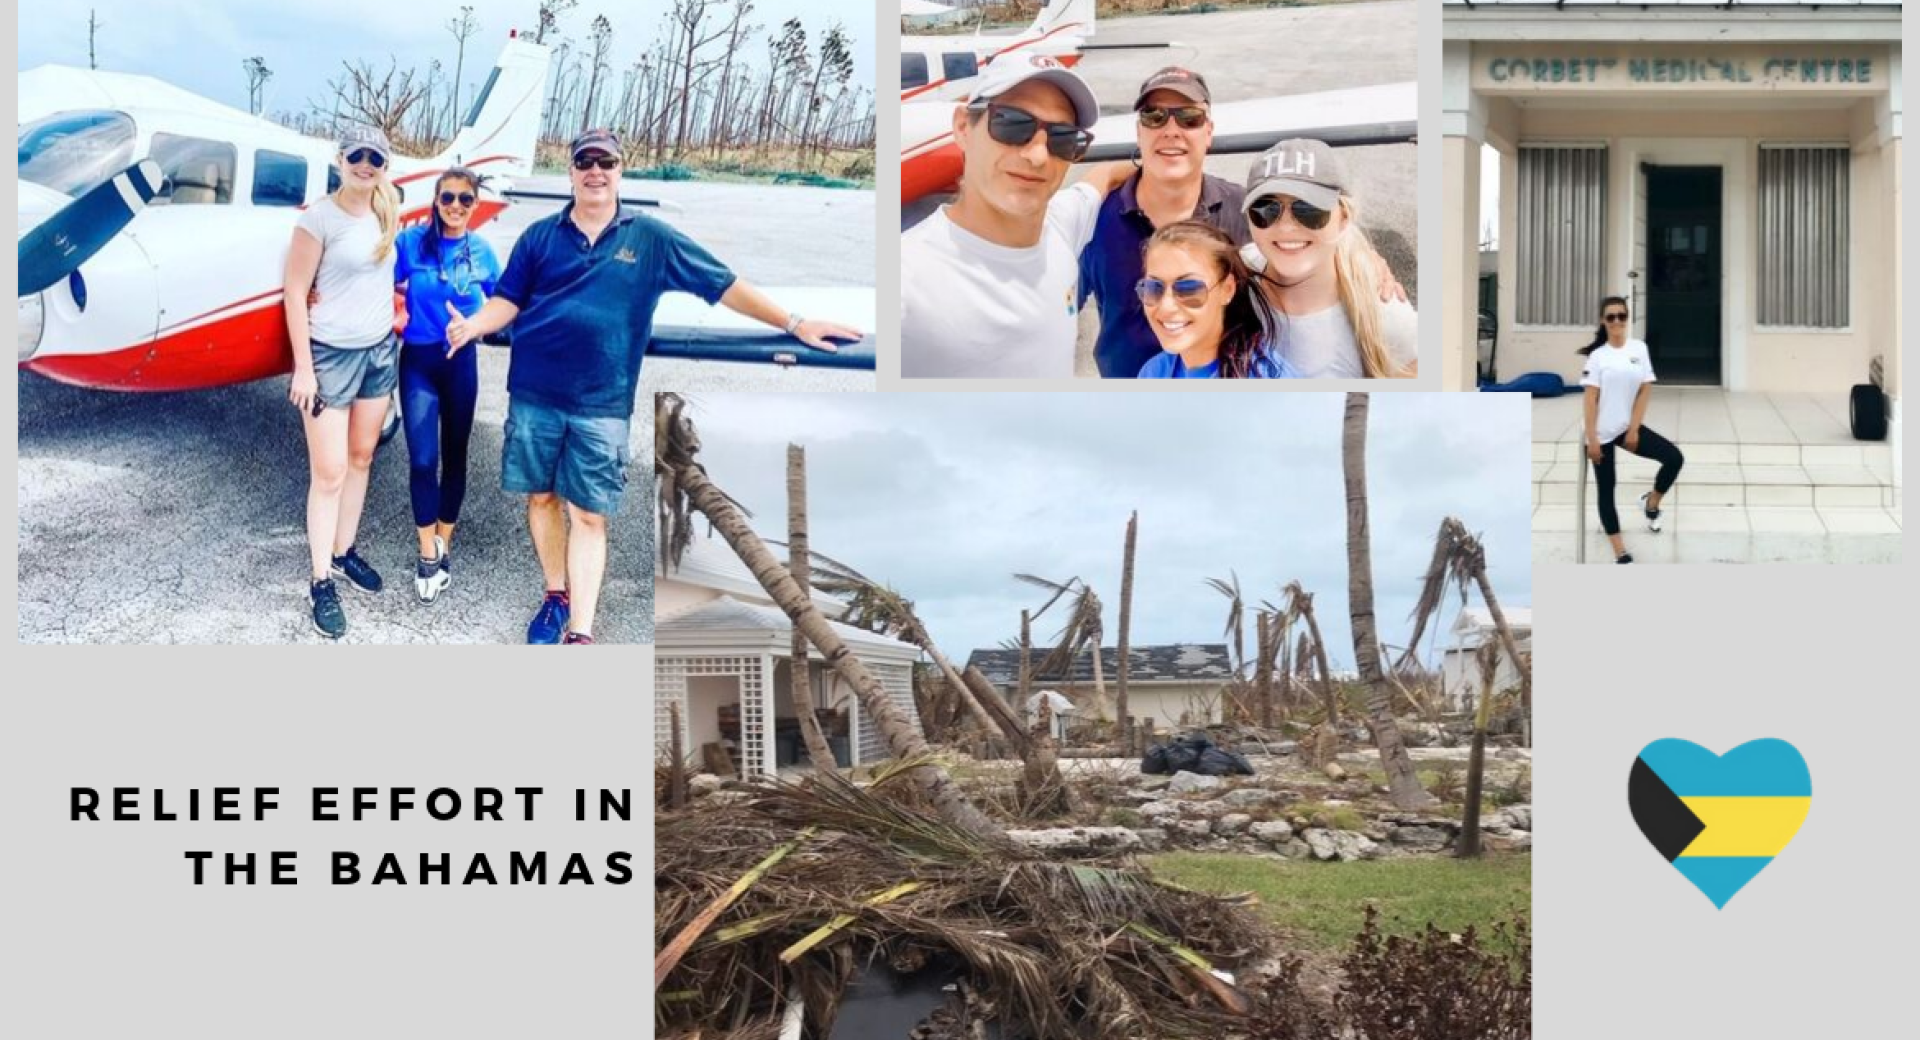 VNA of Florida Registered Nurse Assists with Relief Efforts in the Bahamas